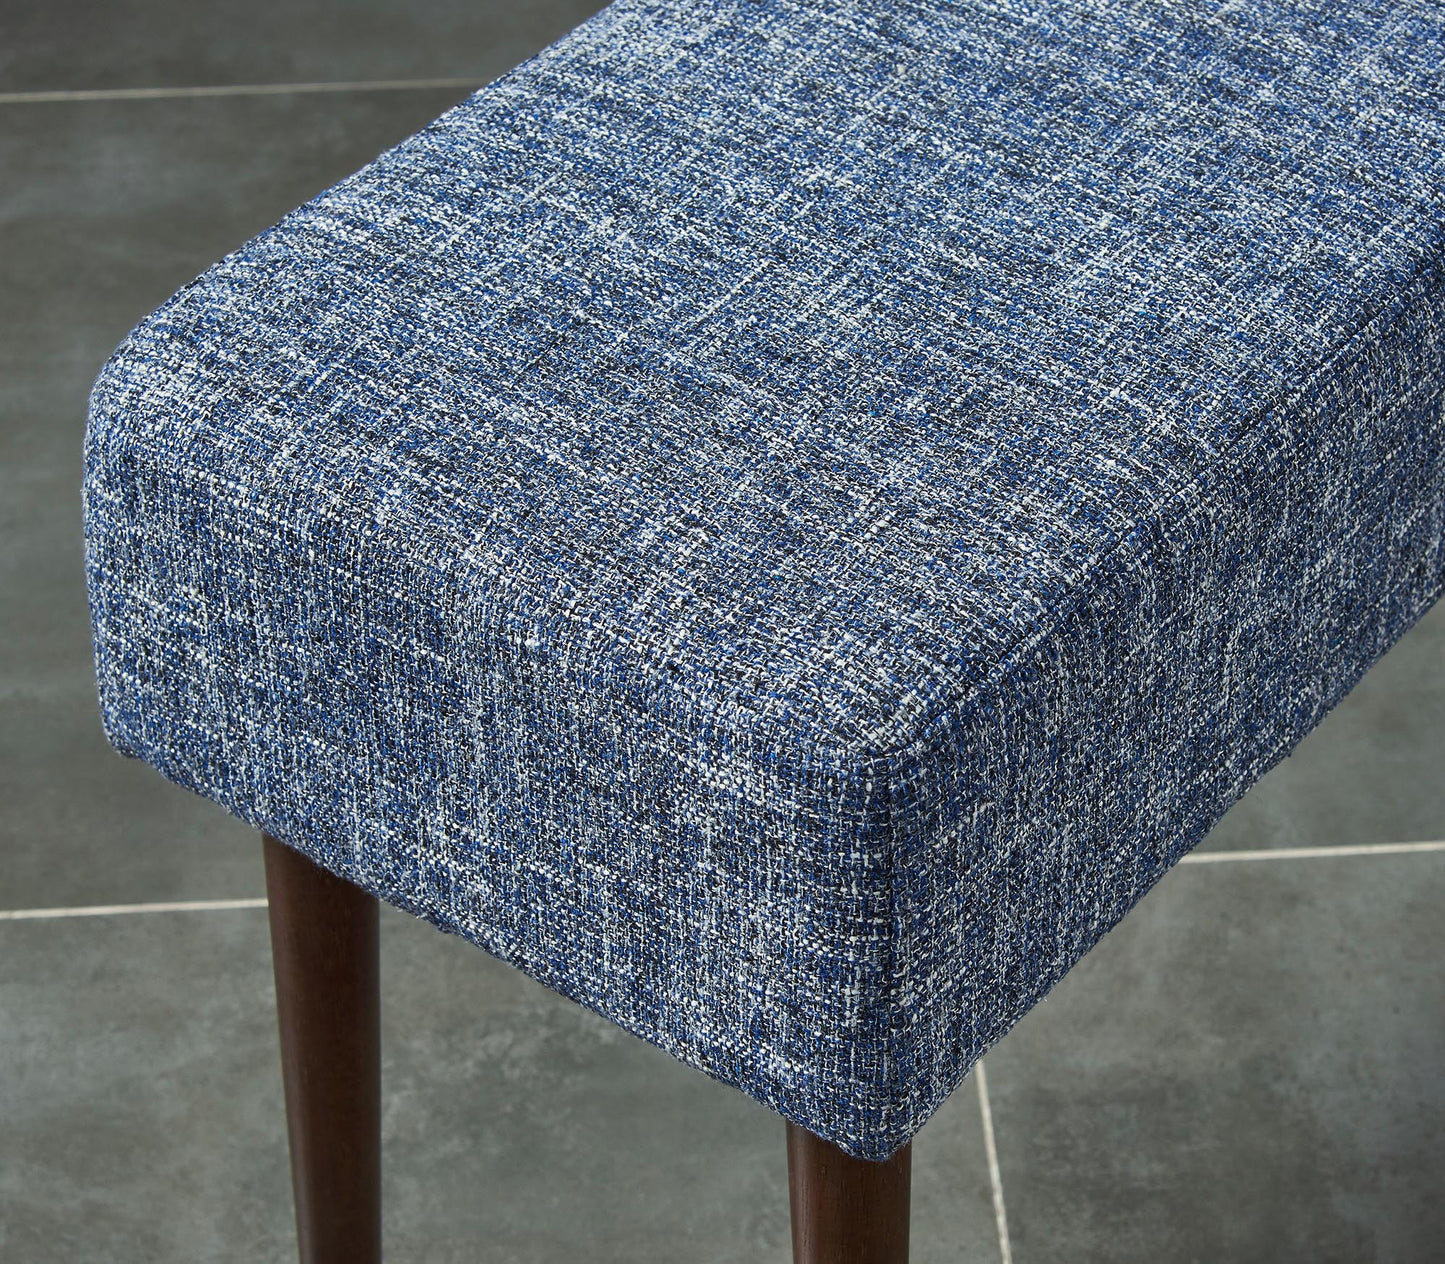 (MINTO BLUE)- FABRIC- BENCH